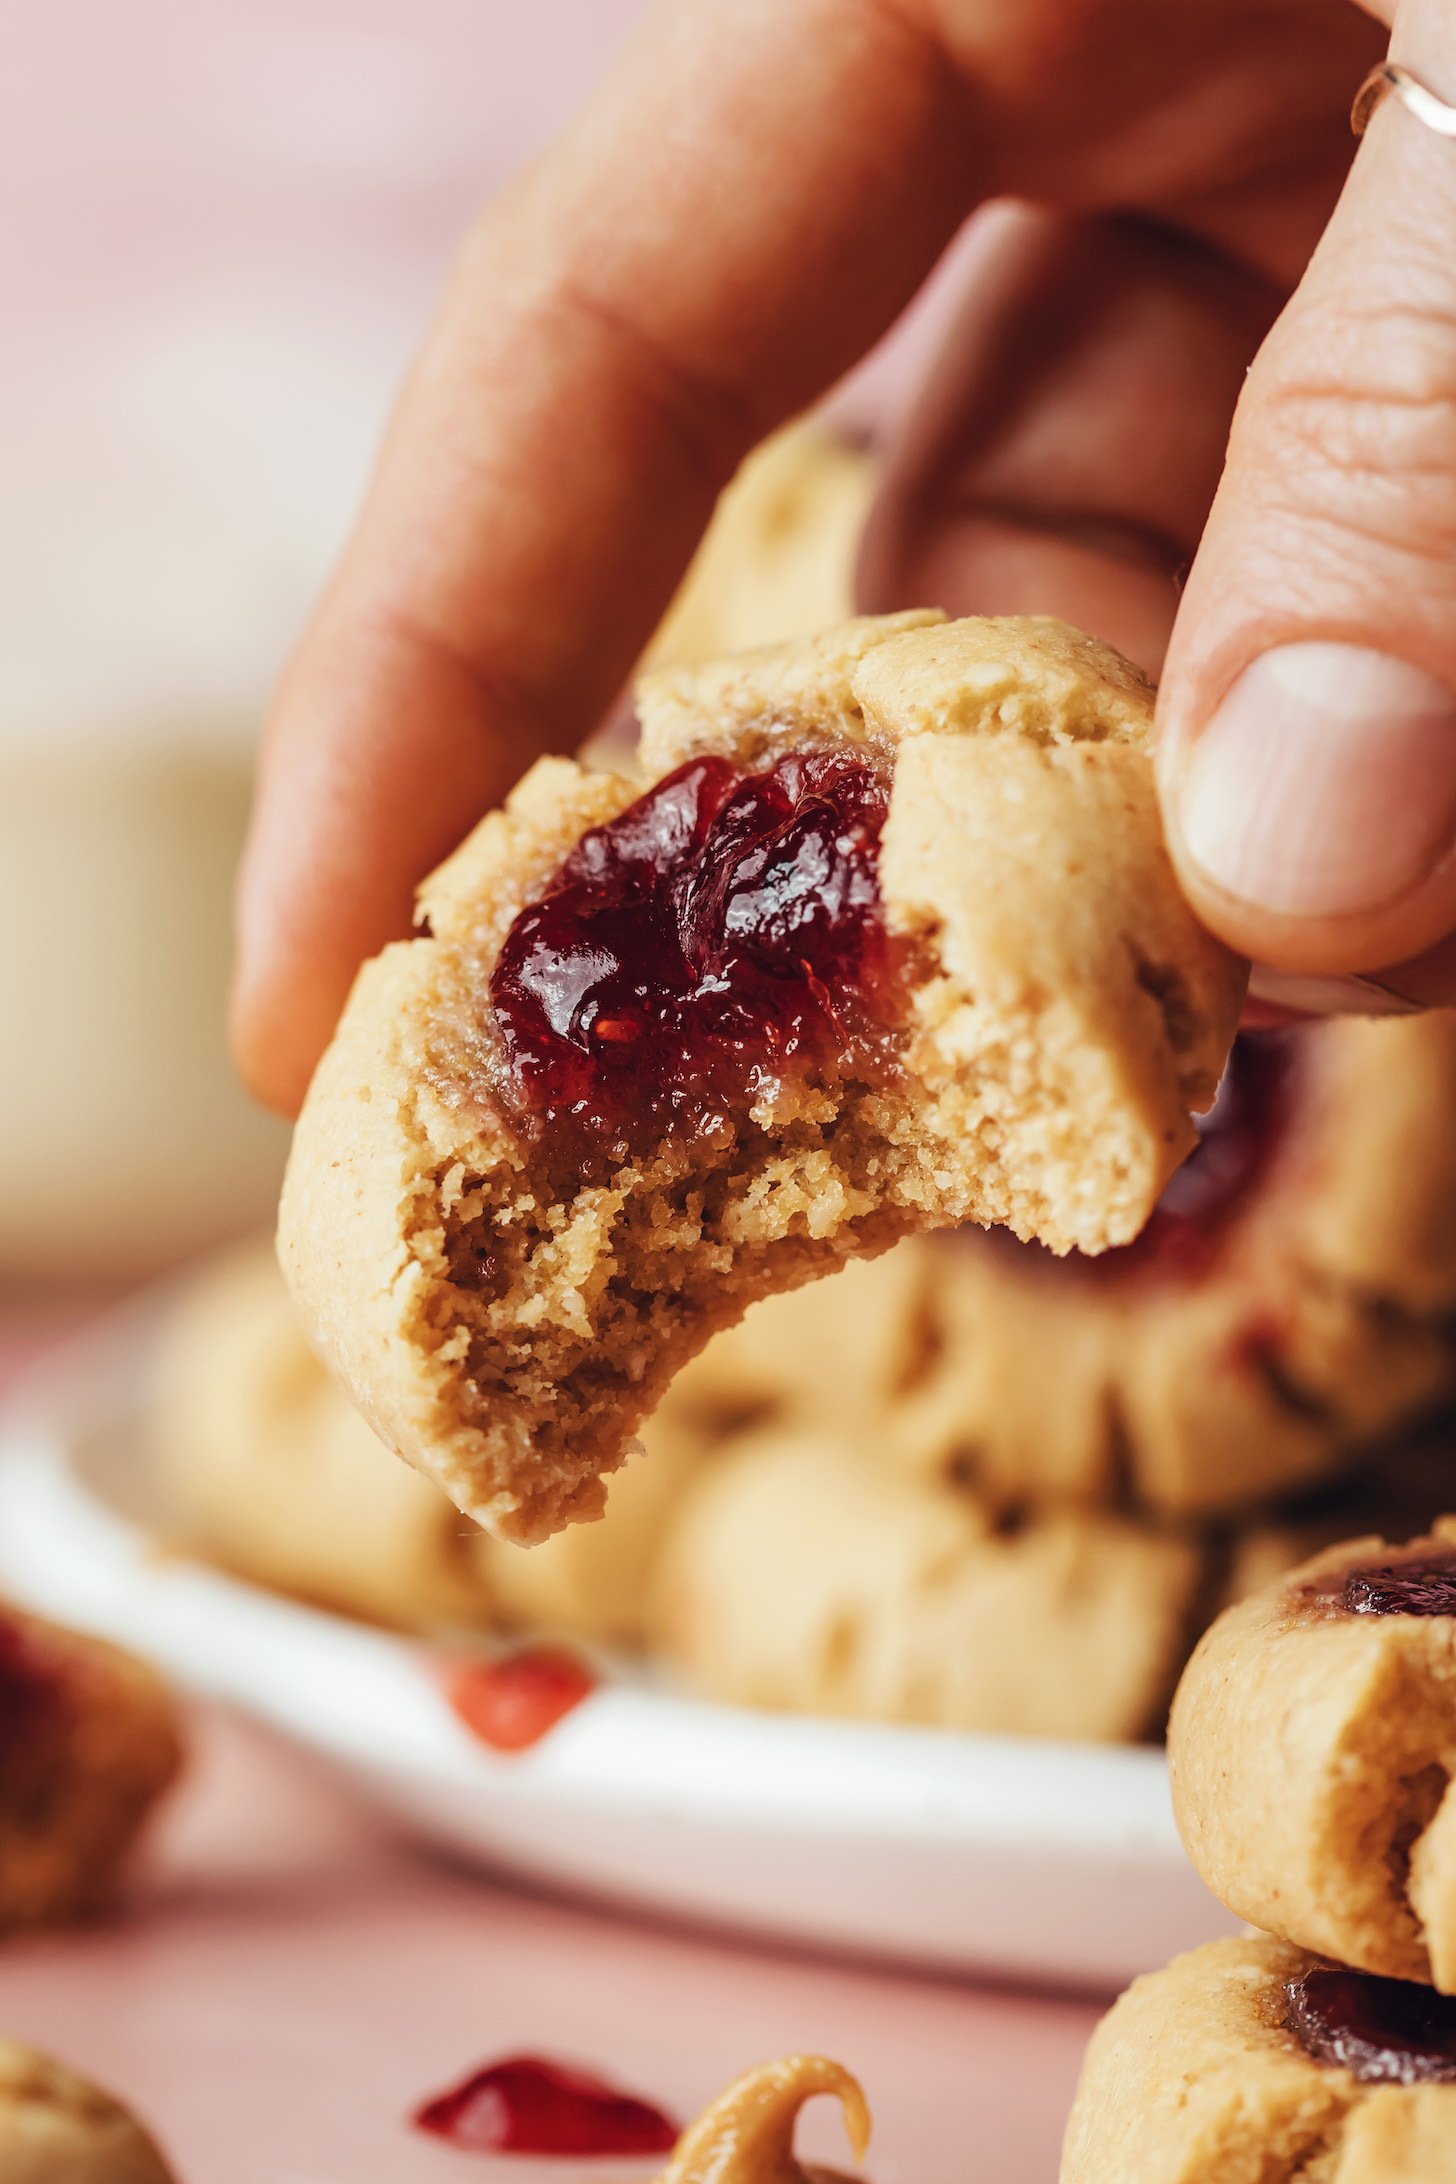 Hold a partially eaten thumbprint cookie to reveal the soft, jam-filled center